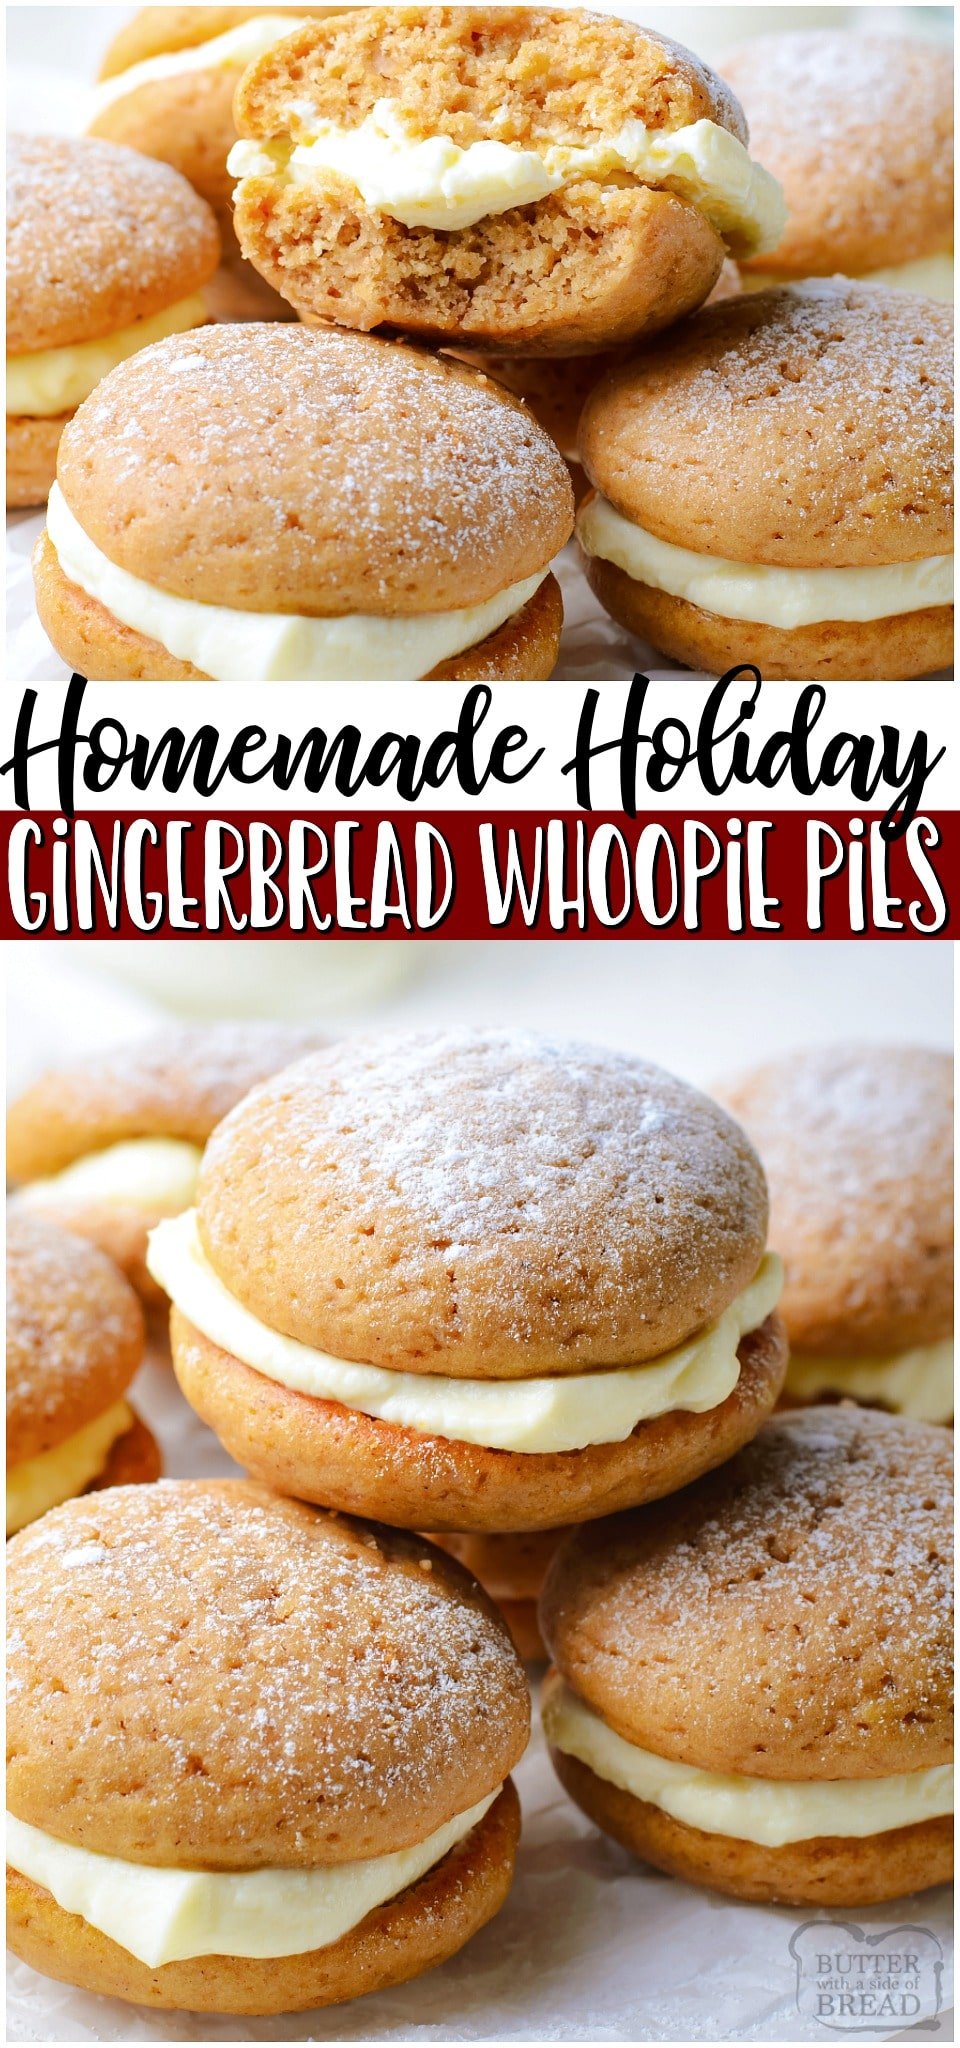 Gingerbread whoopie pies are soft, spiced gingerbread cookies with a lovely cream cheese filling. Perfect gingerbread treat for the holidays! 